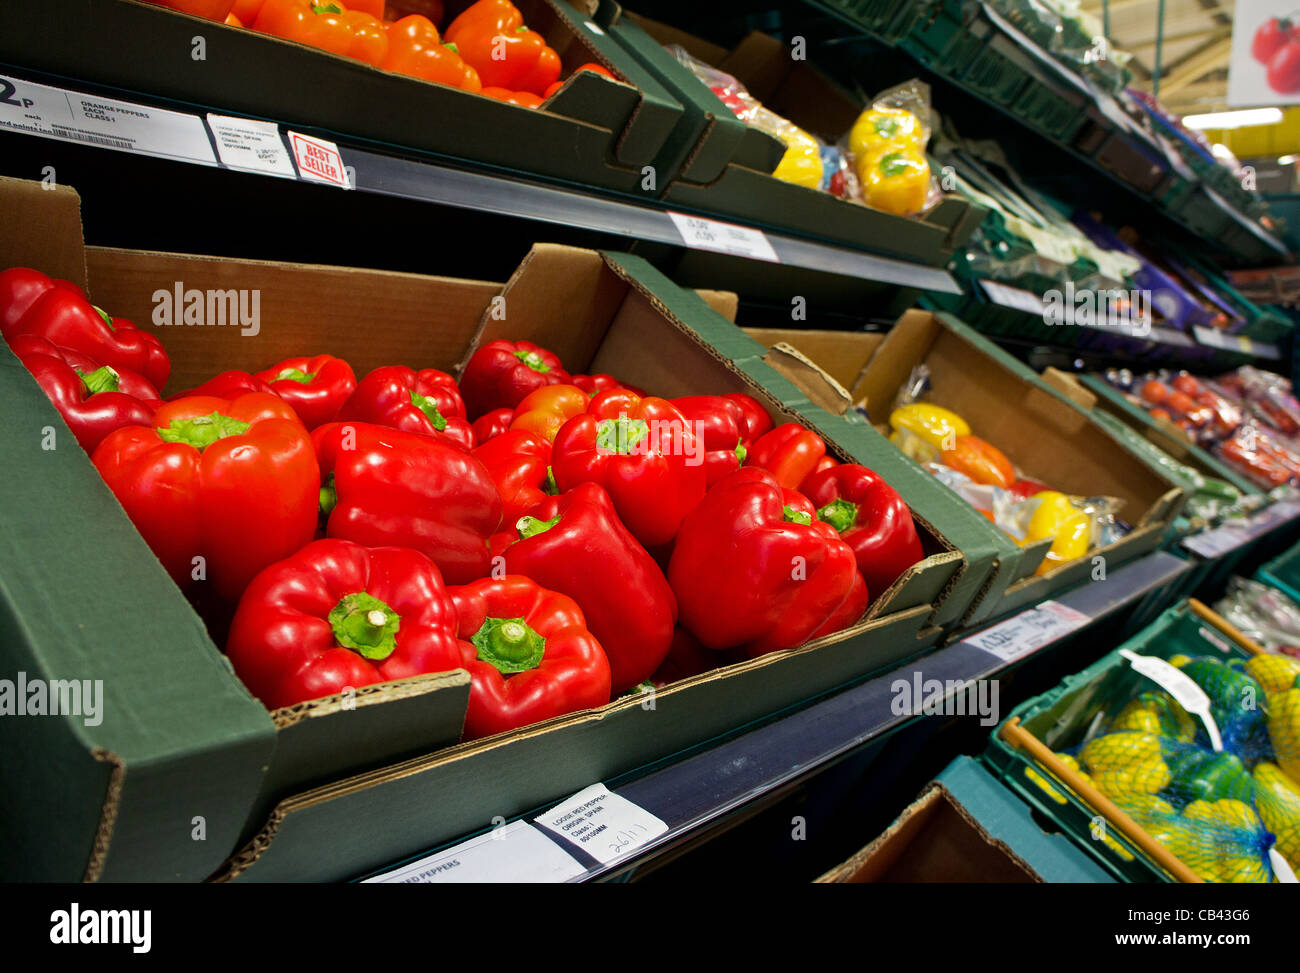 Fresh red peppers and other produce ina tesco supermarket, uk Stock Photo